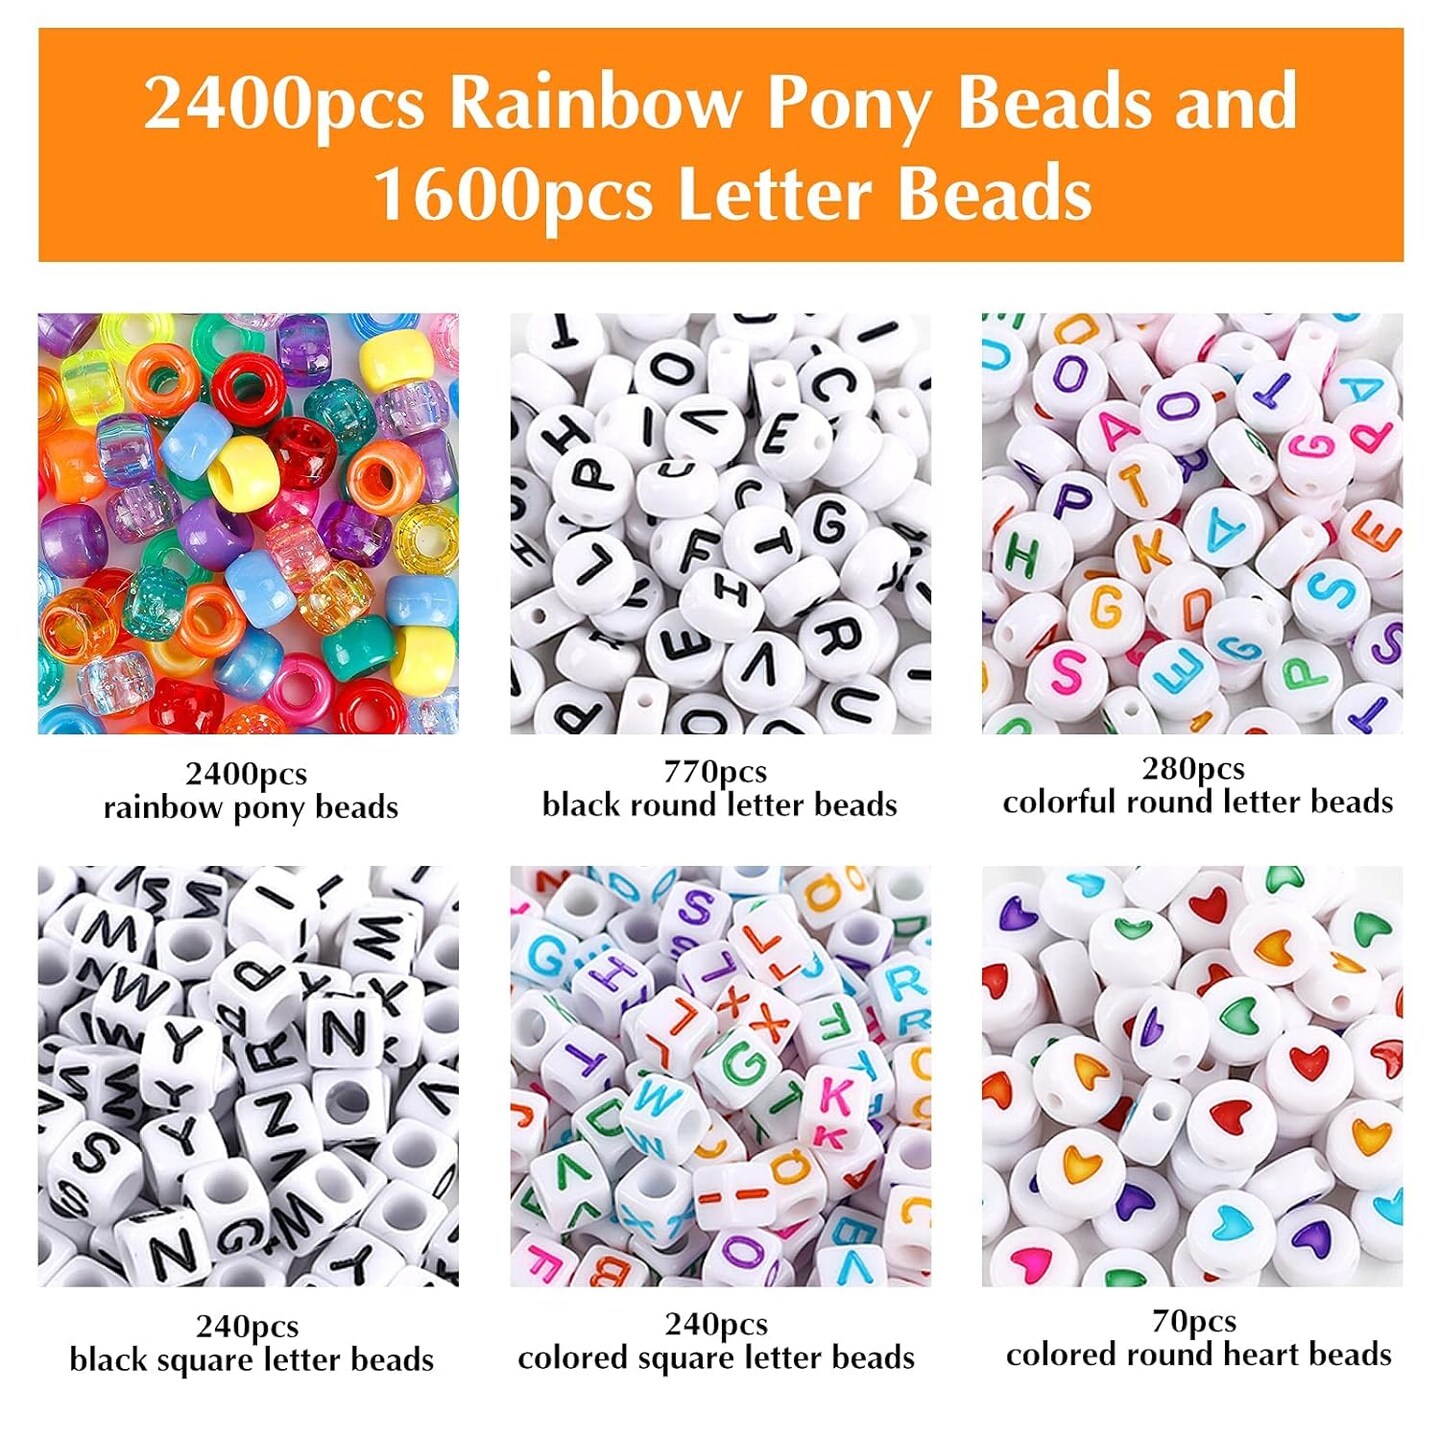 4000Pcs Pony Beads Kit, 2400Pcs Rainbow Kandi Beads And 1600Pcs Letter Beads, 24 Colors Plastic Craft Beads Bulk For Bracelets Jewelry Making With 20M Crystal String And 30M Elastic String